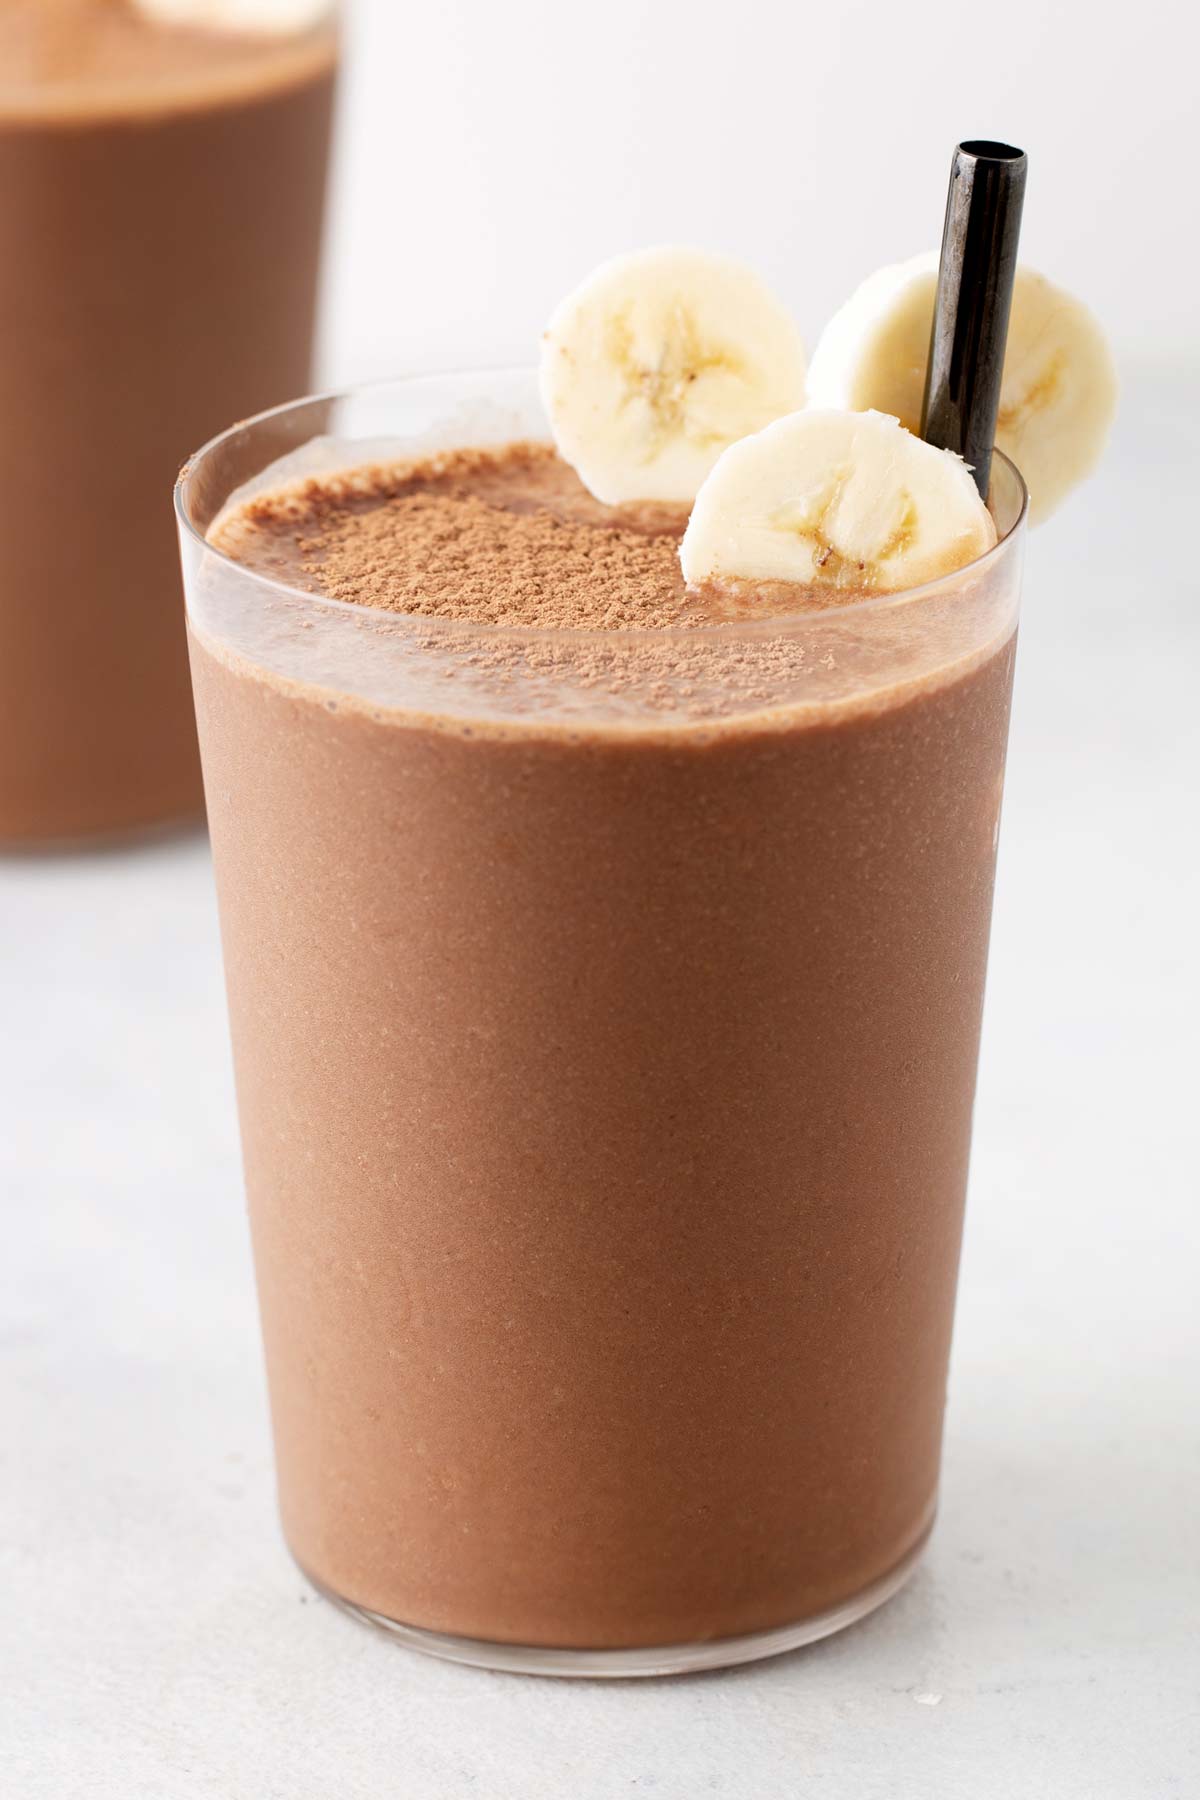 Chocolate smoothie in a glass.